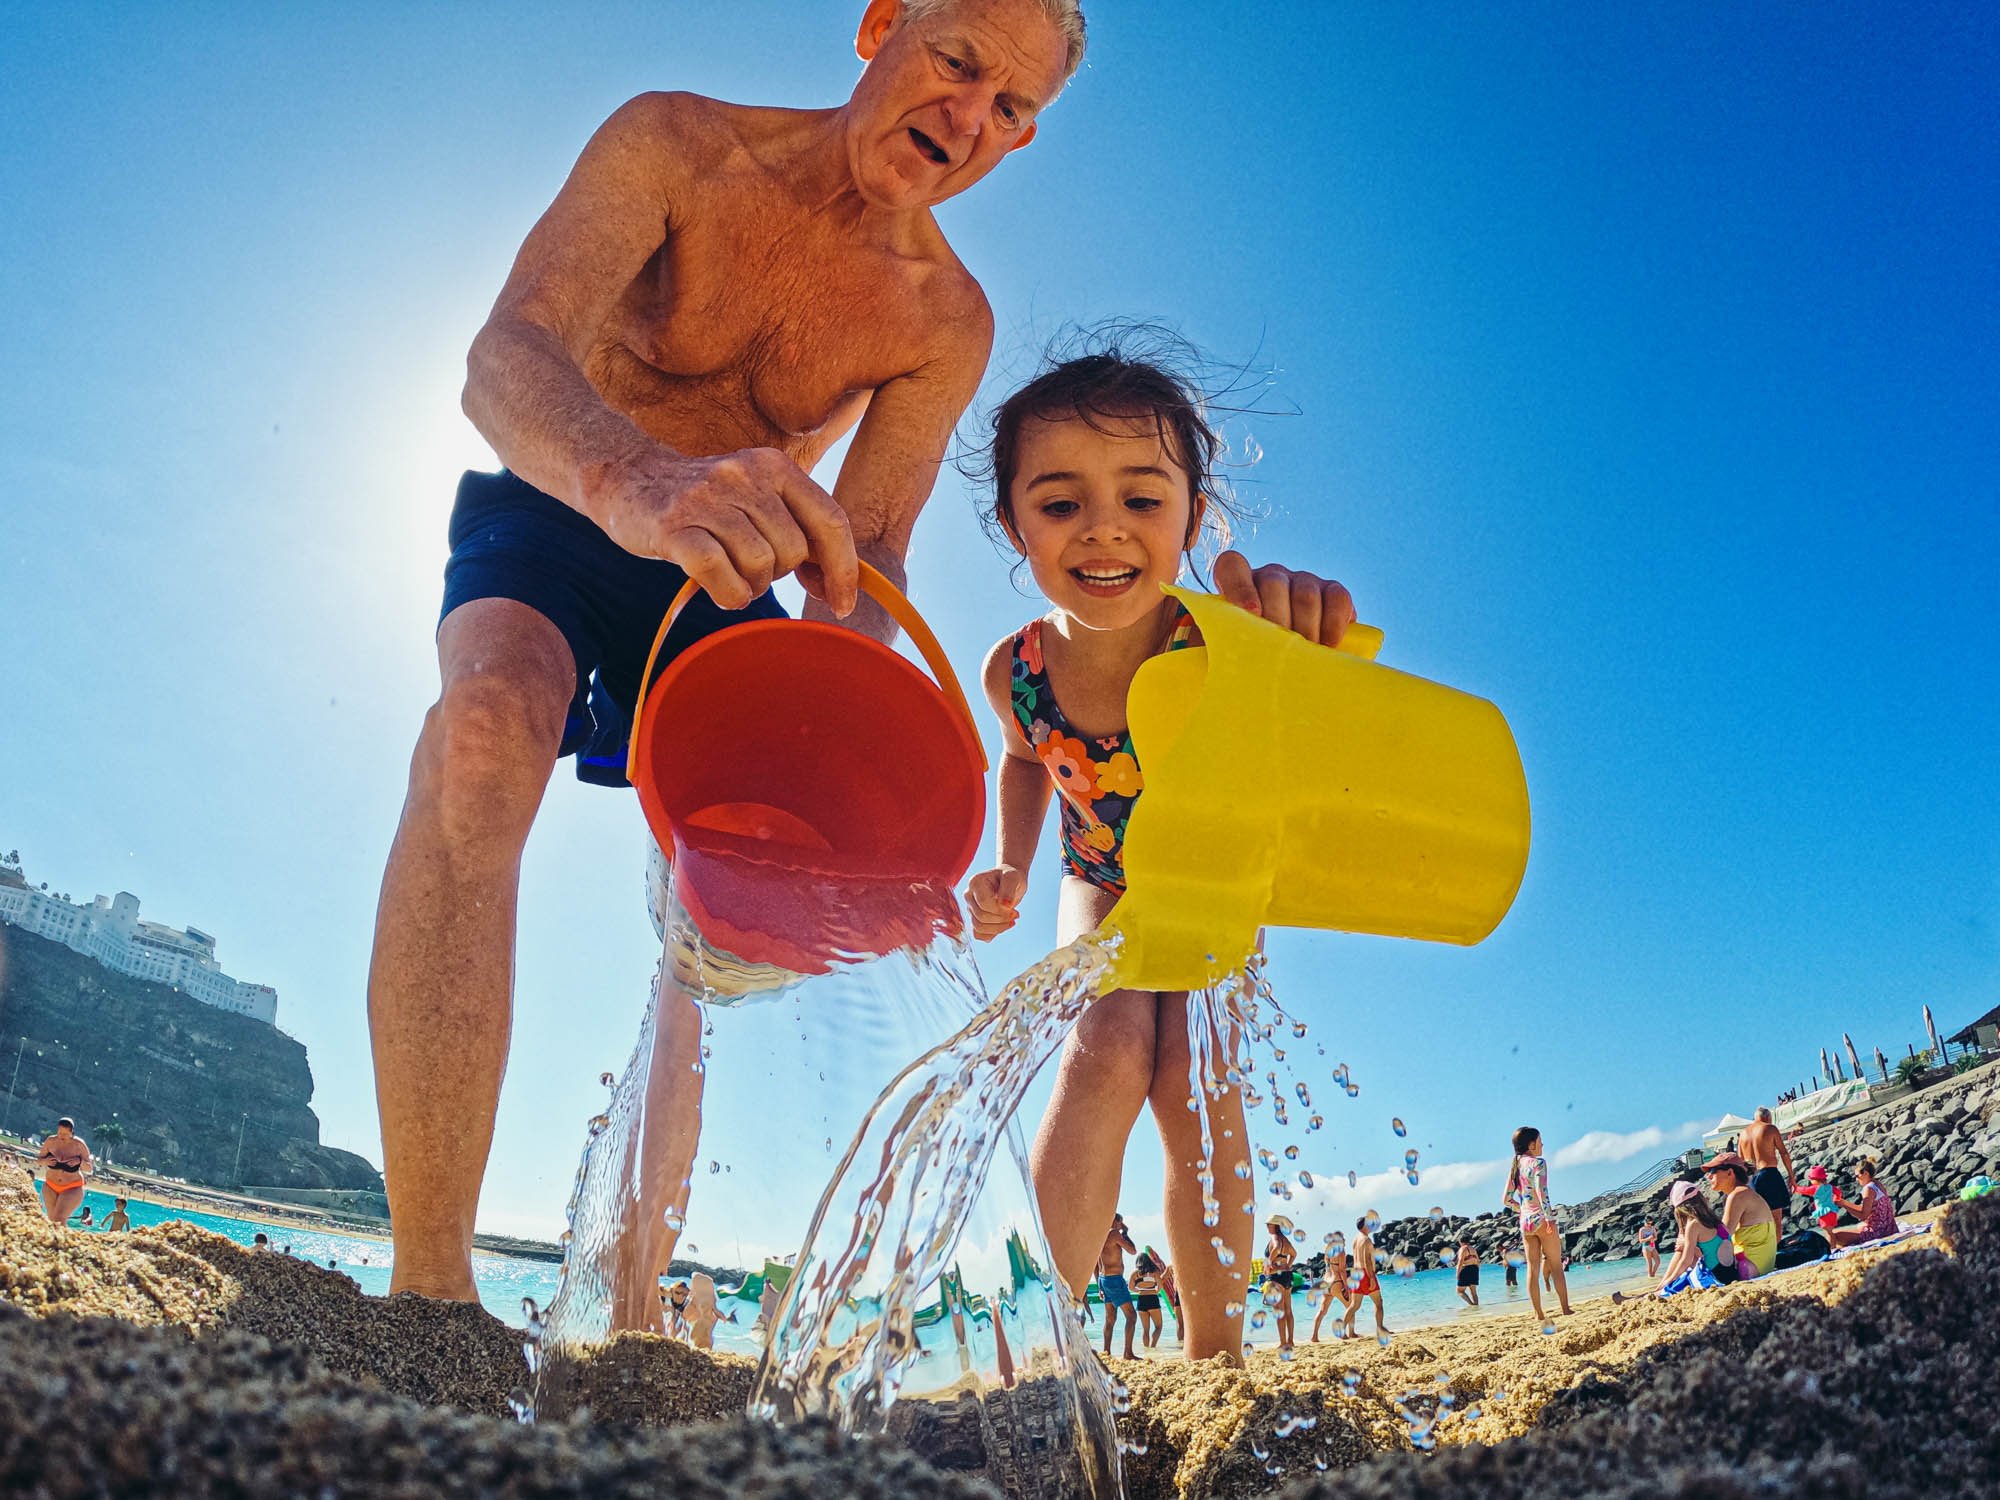 girl-granddad-pouring-water-colourful-beach-buckets-summer-day-unposed-family-photography-photojournalism-documentary-approach.jpg